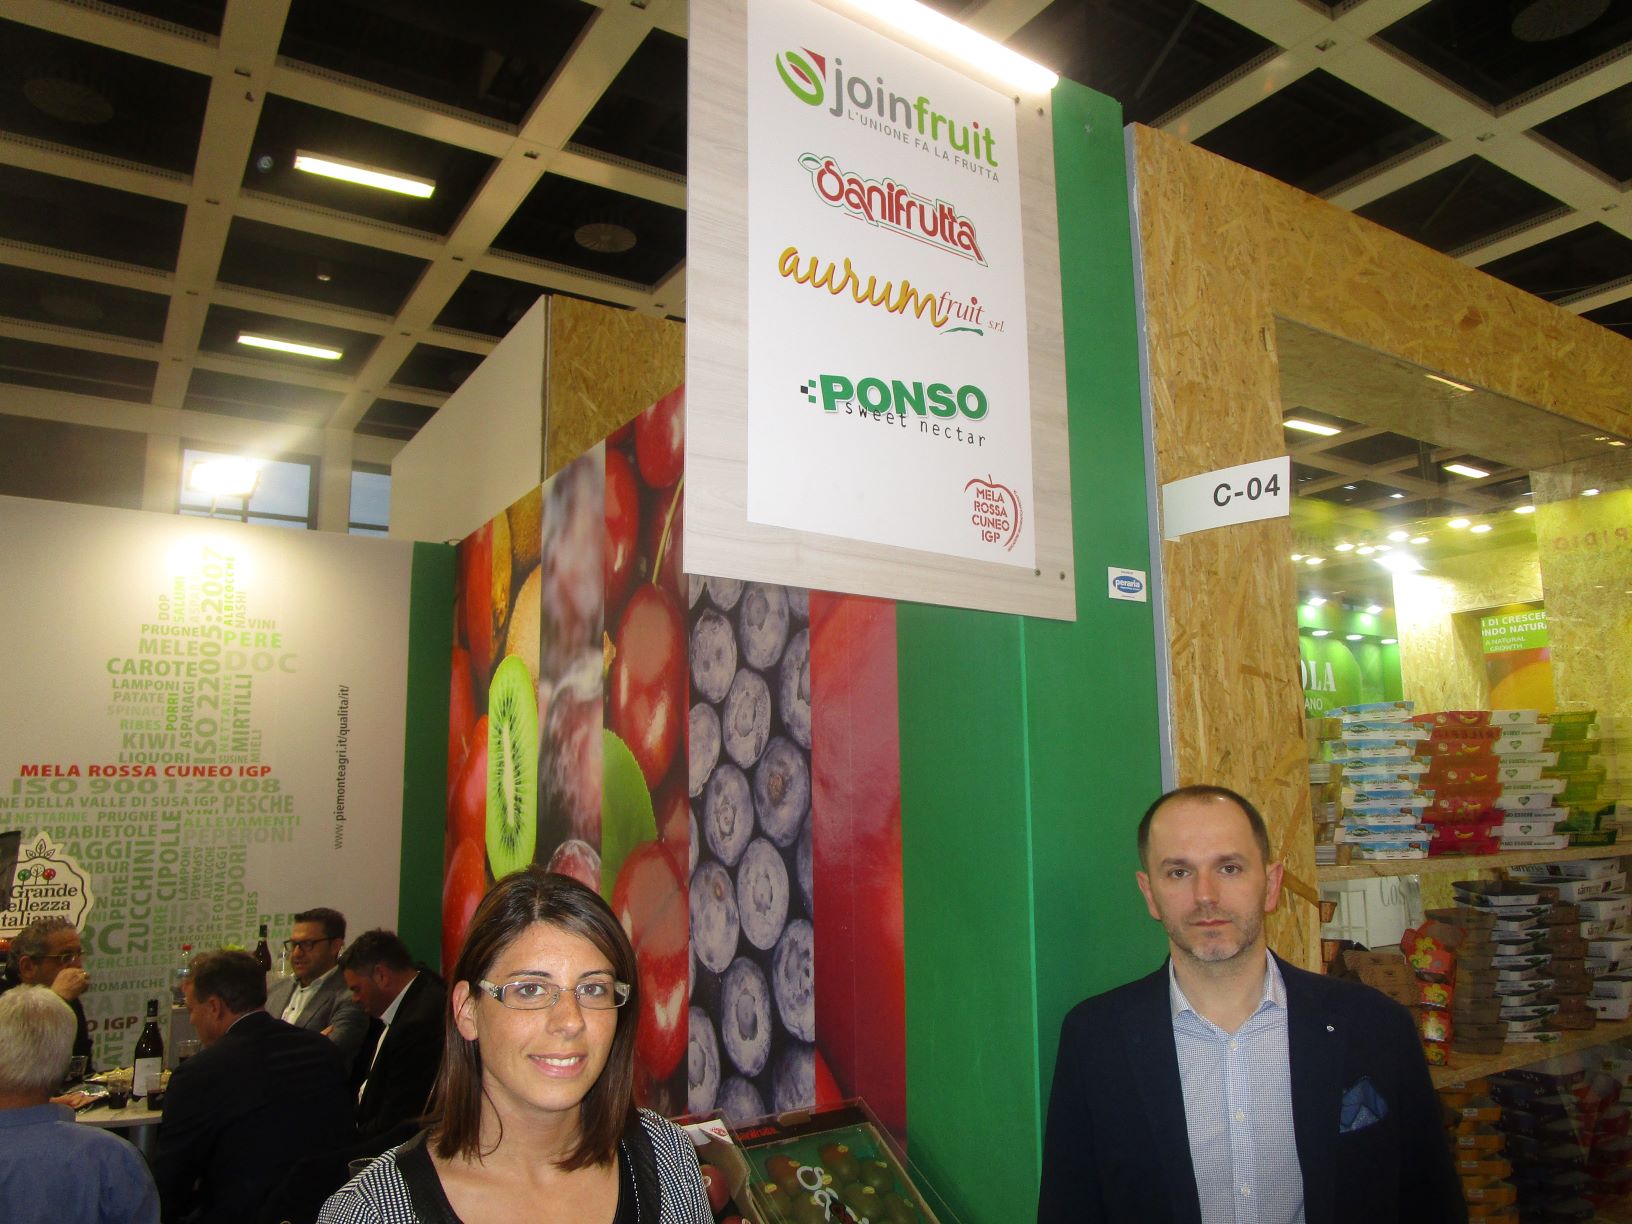 Sanifrutta focuses on sustainable and plastic free packaging